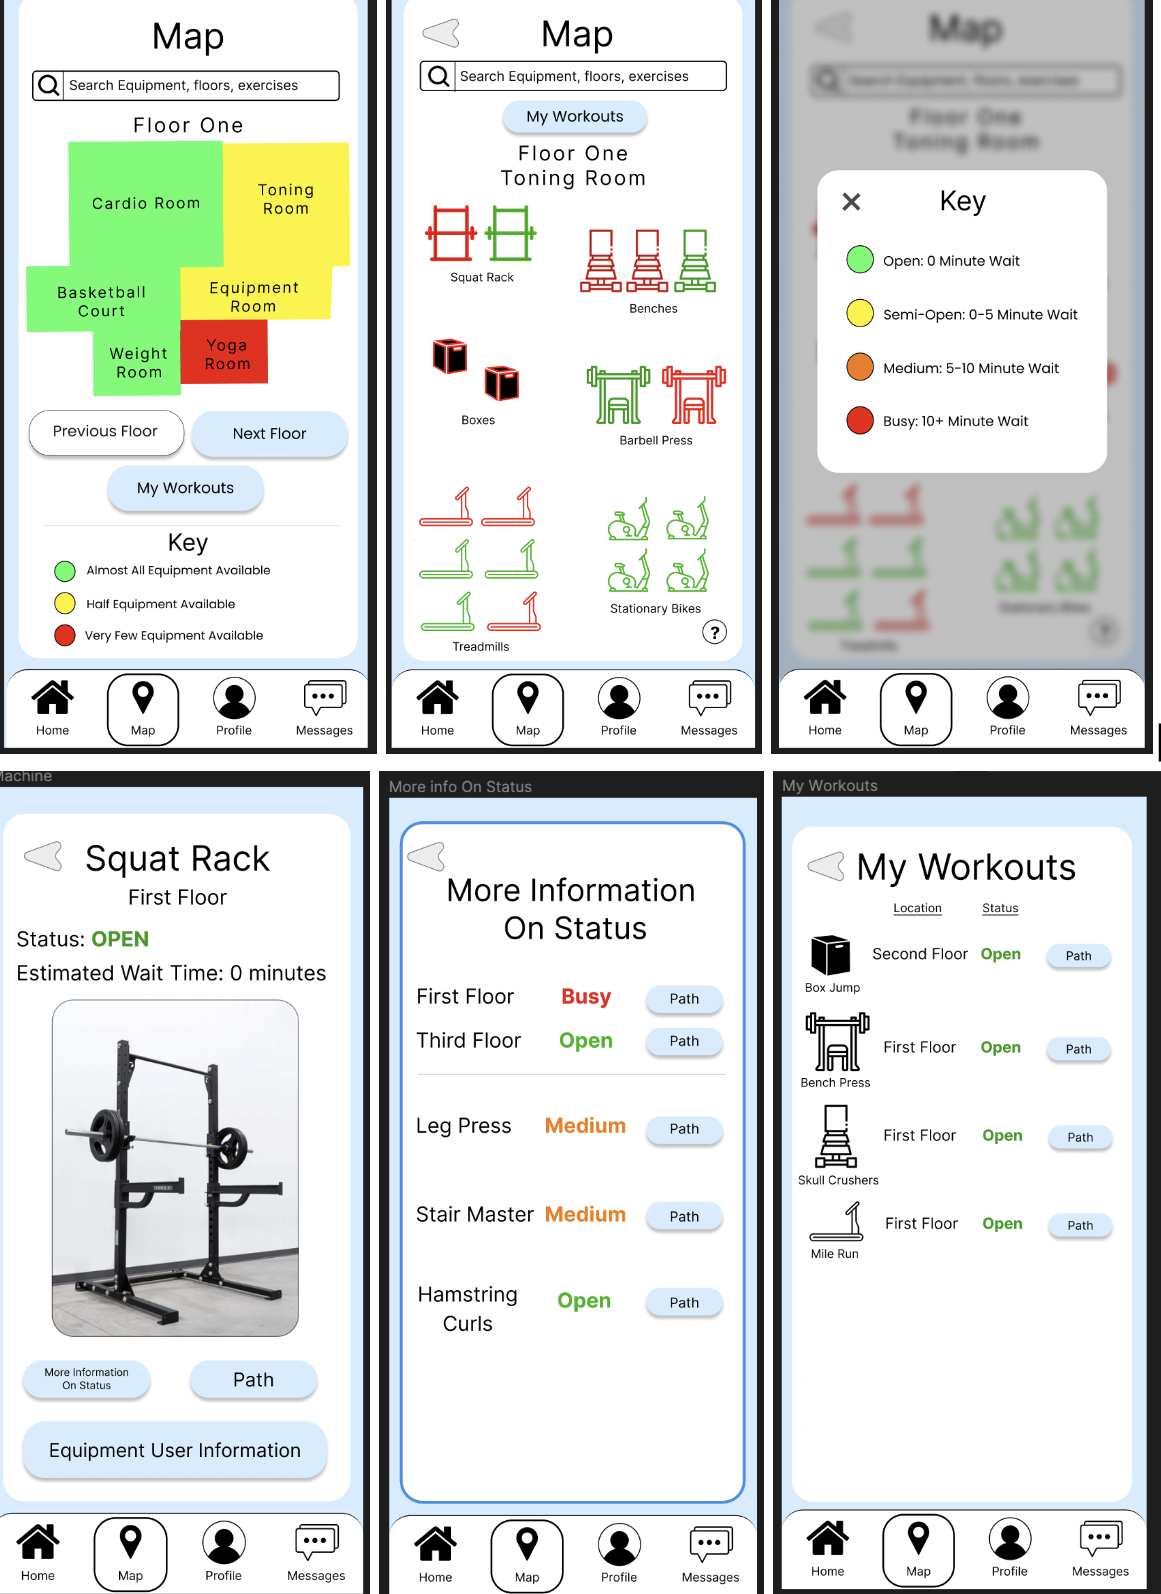 A walkthrough detailing how participants can accomplish task 1: Participants are able to infer the status of various machines from the gym map (i.e. how busy they are and what similar machines are open that they might be able to use as an alternative).